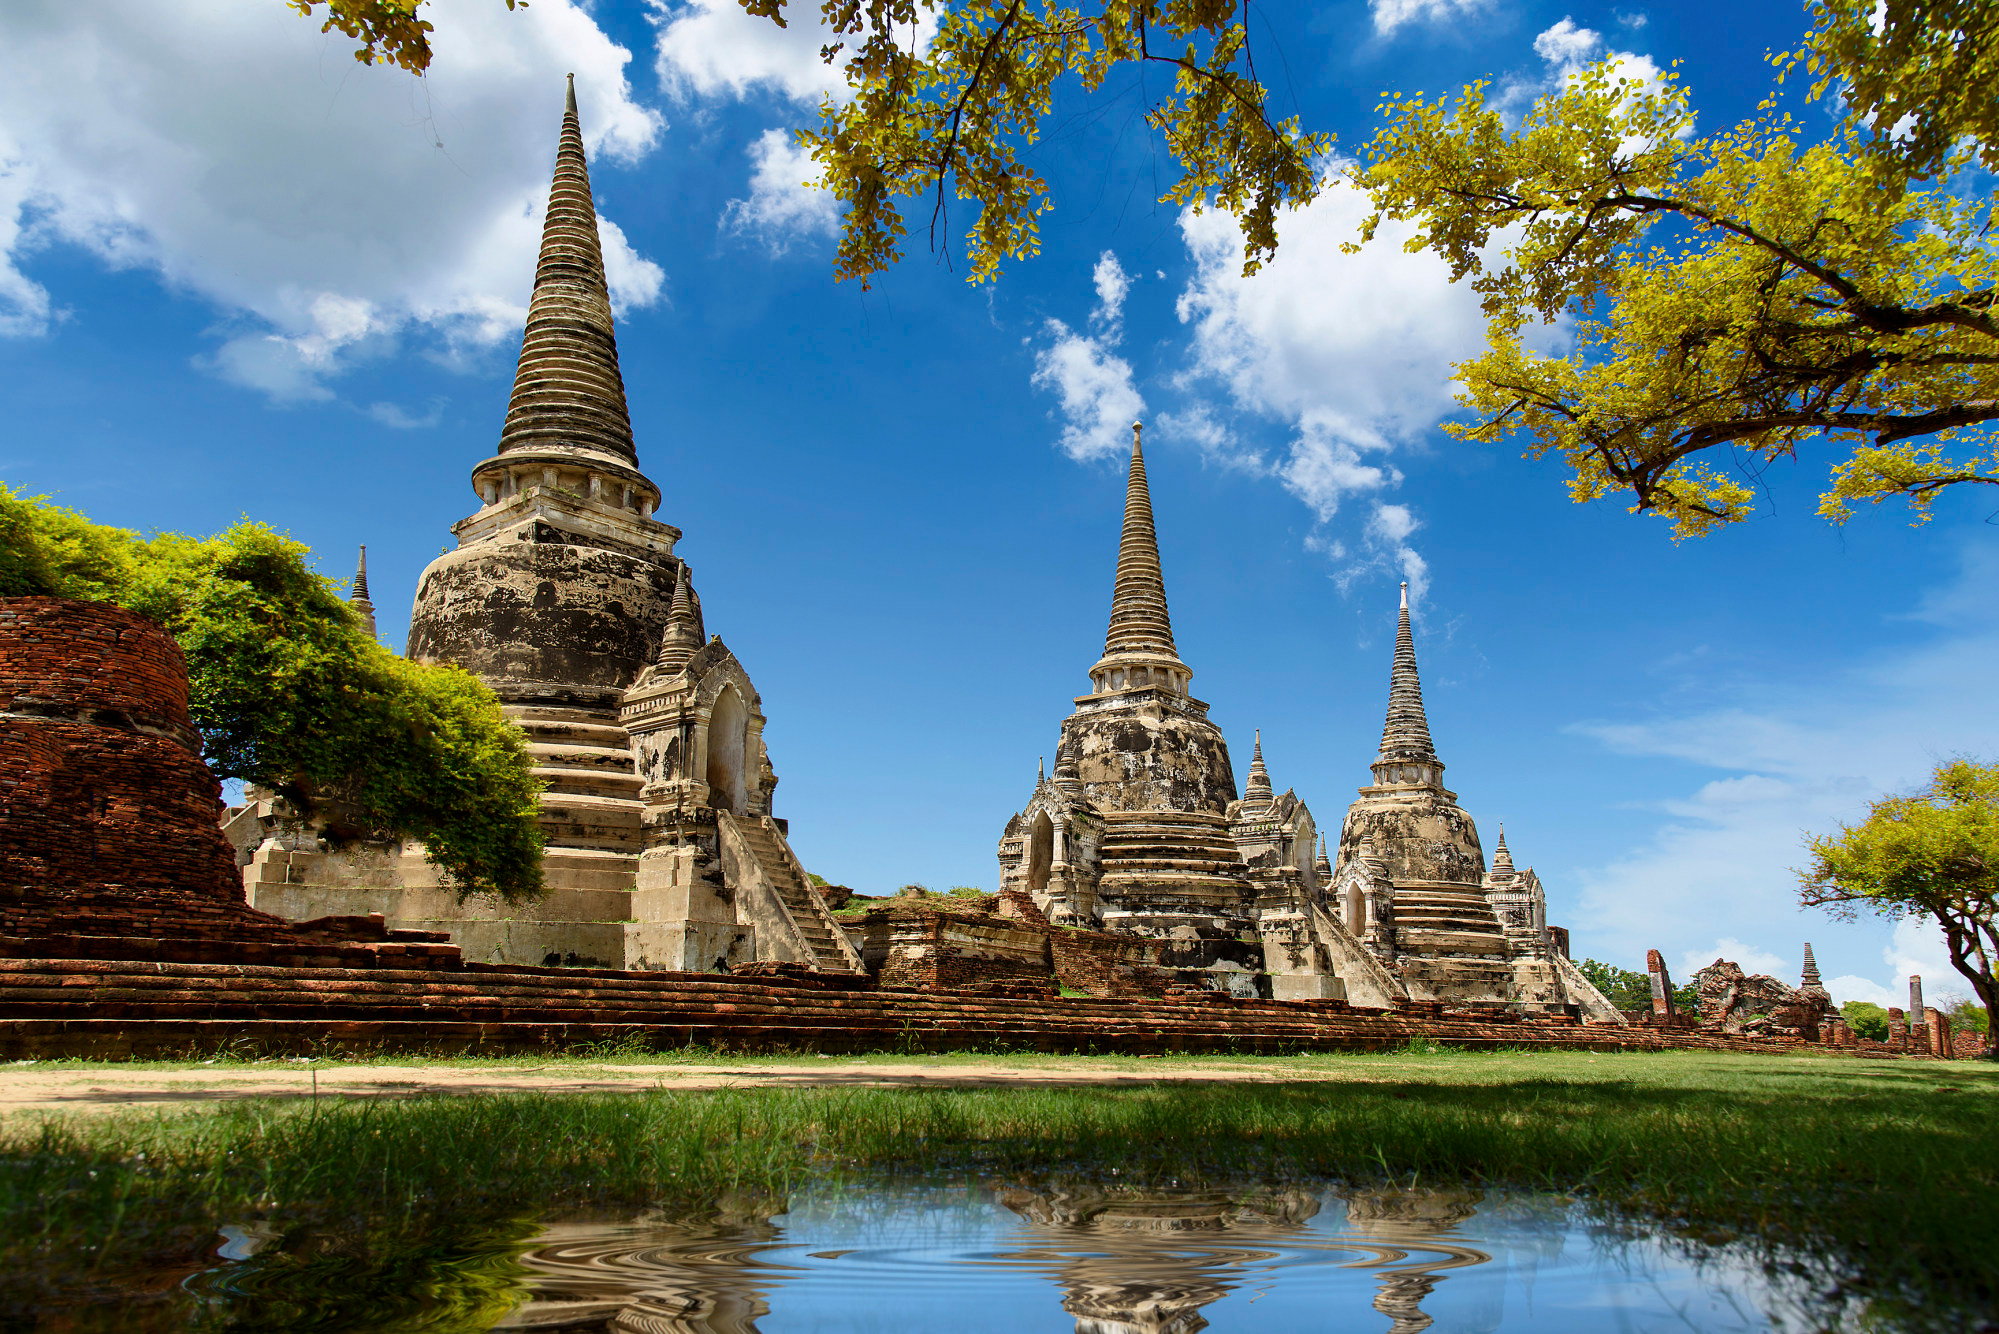 Ayutthaya is home to many ancient temples. Photo: Shutterstock